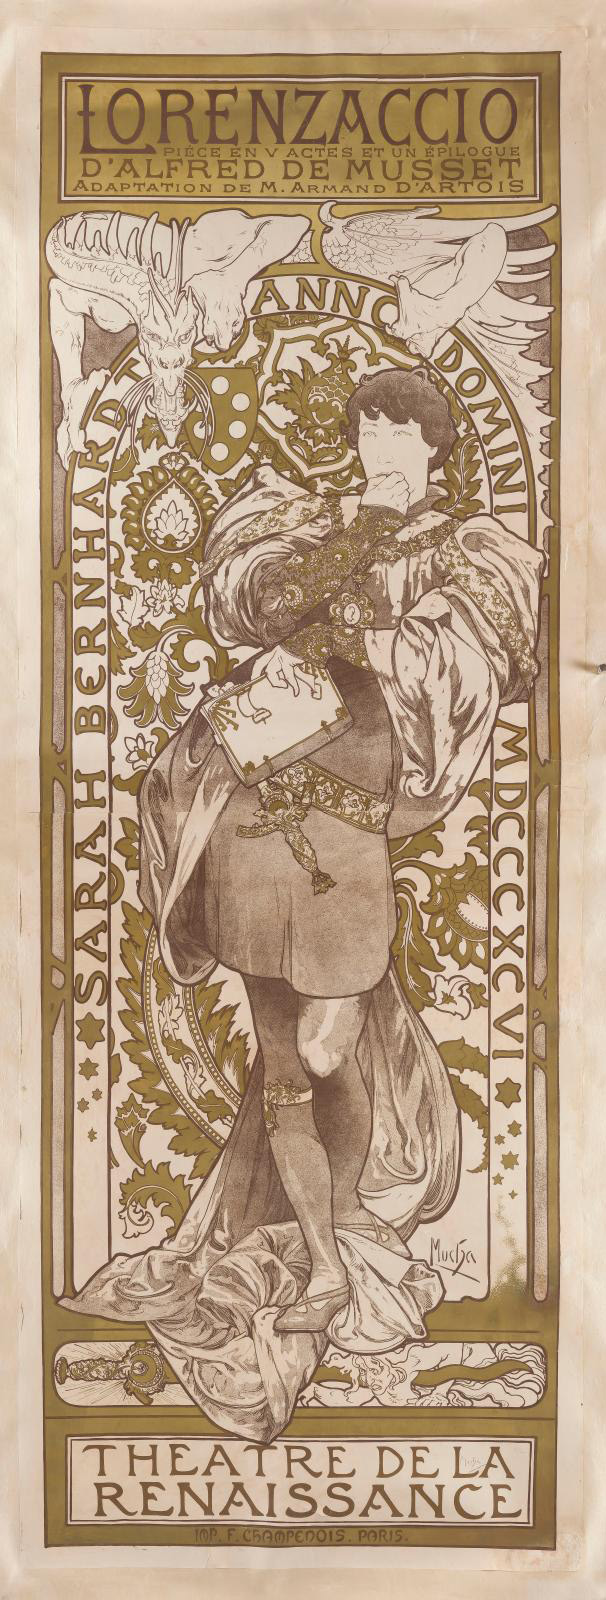 One of the best-known works by Alfons Mucha (1860-1939), his 1896 poster for Alfred de Musset's five-act play Lorenzaccio (207 x 77 cm/81.